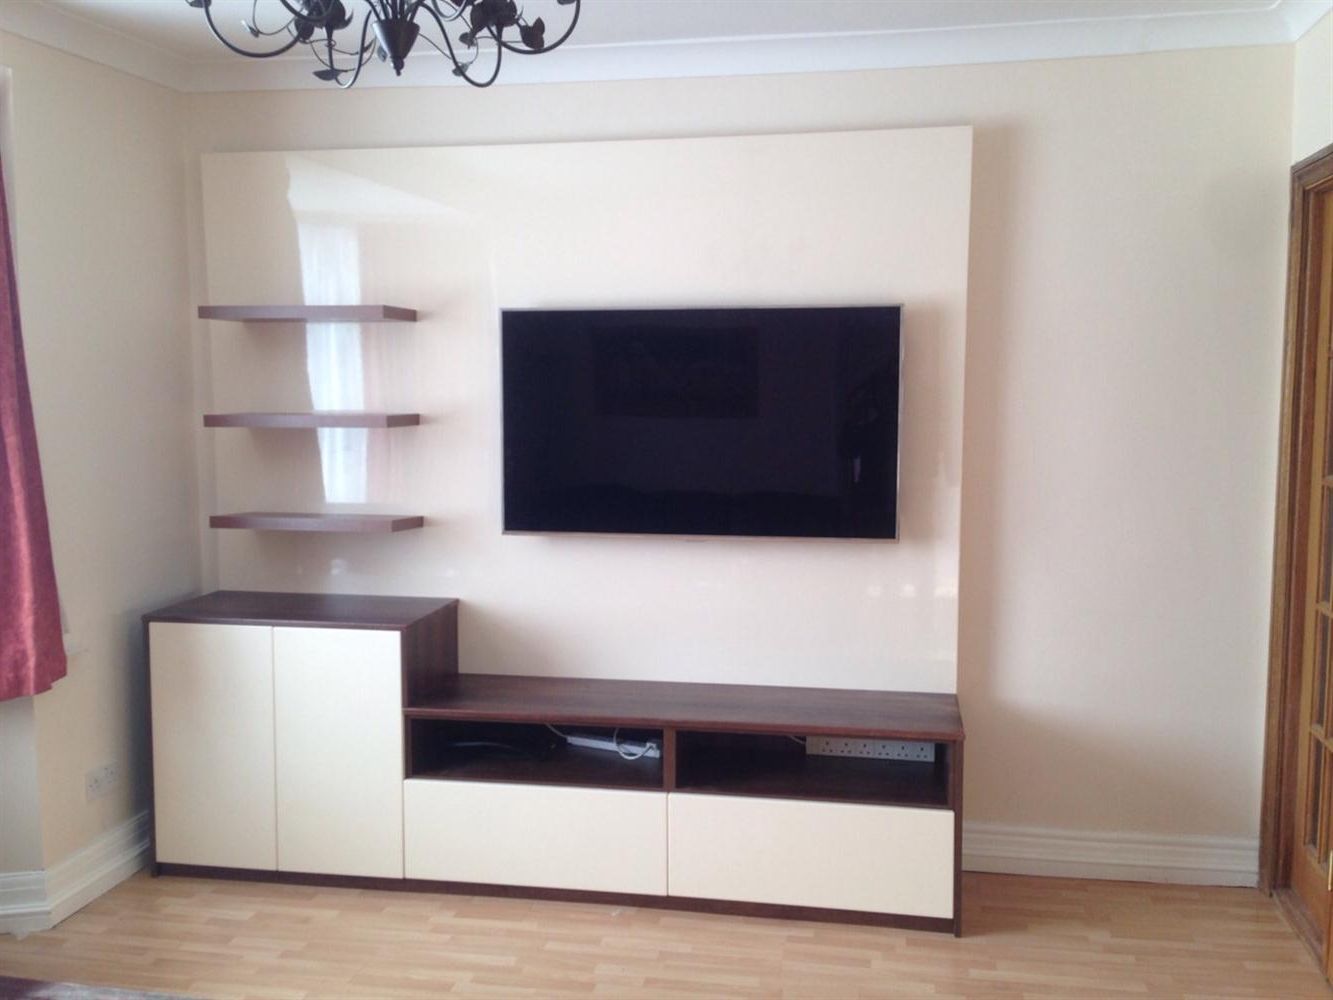 Very Cheap Tv Units With Regard To Most Up To Date Cheap Fitted Tv Units Slough, Tv Units Designers Reading, Tv Units (View 1 of 20)